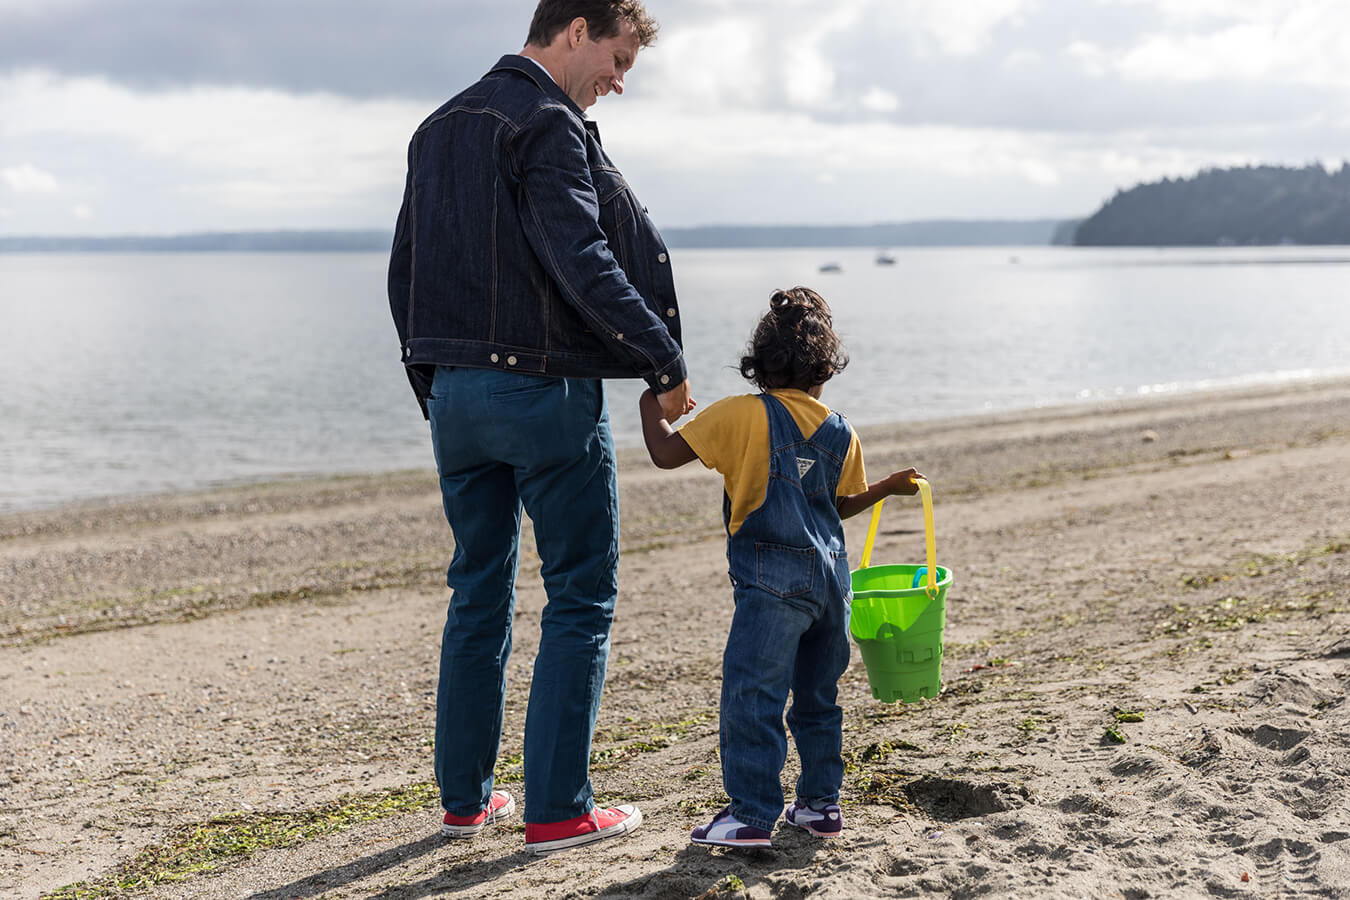 Father and child at beach. Child in yellow shirt carries a green toy bucket